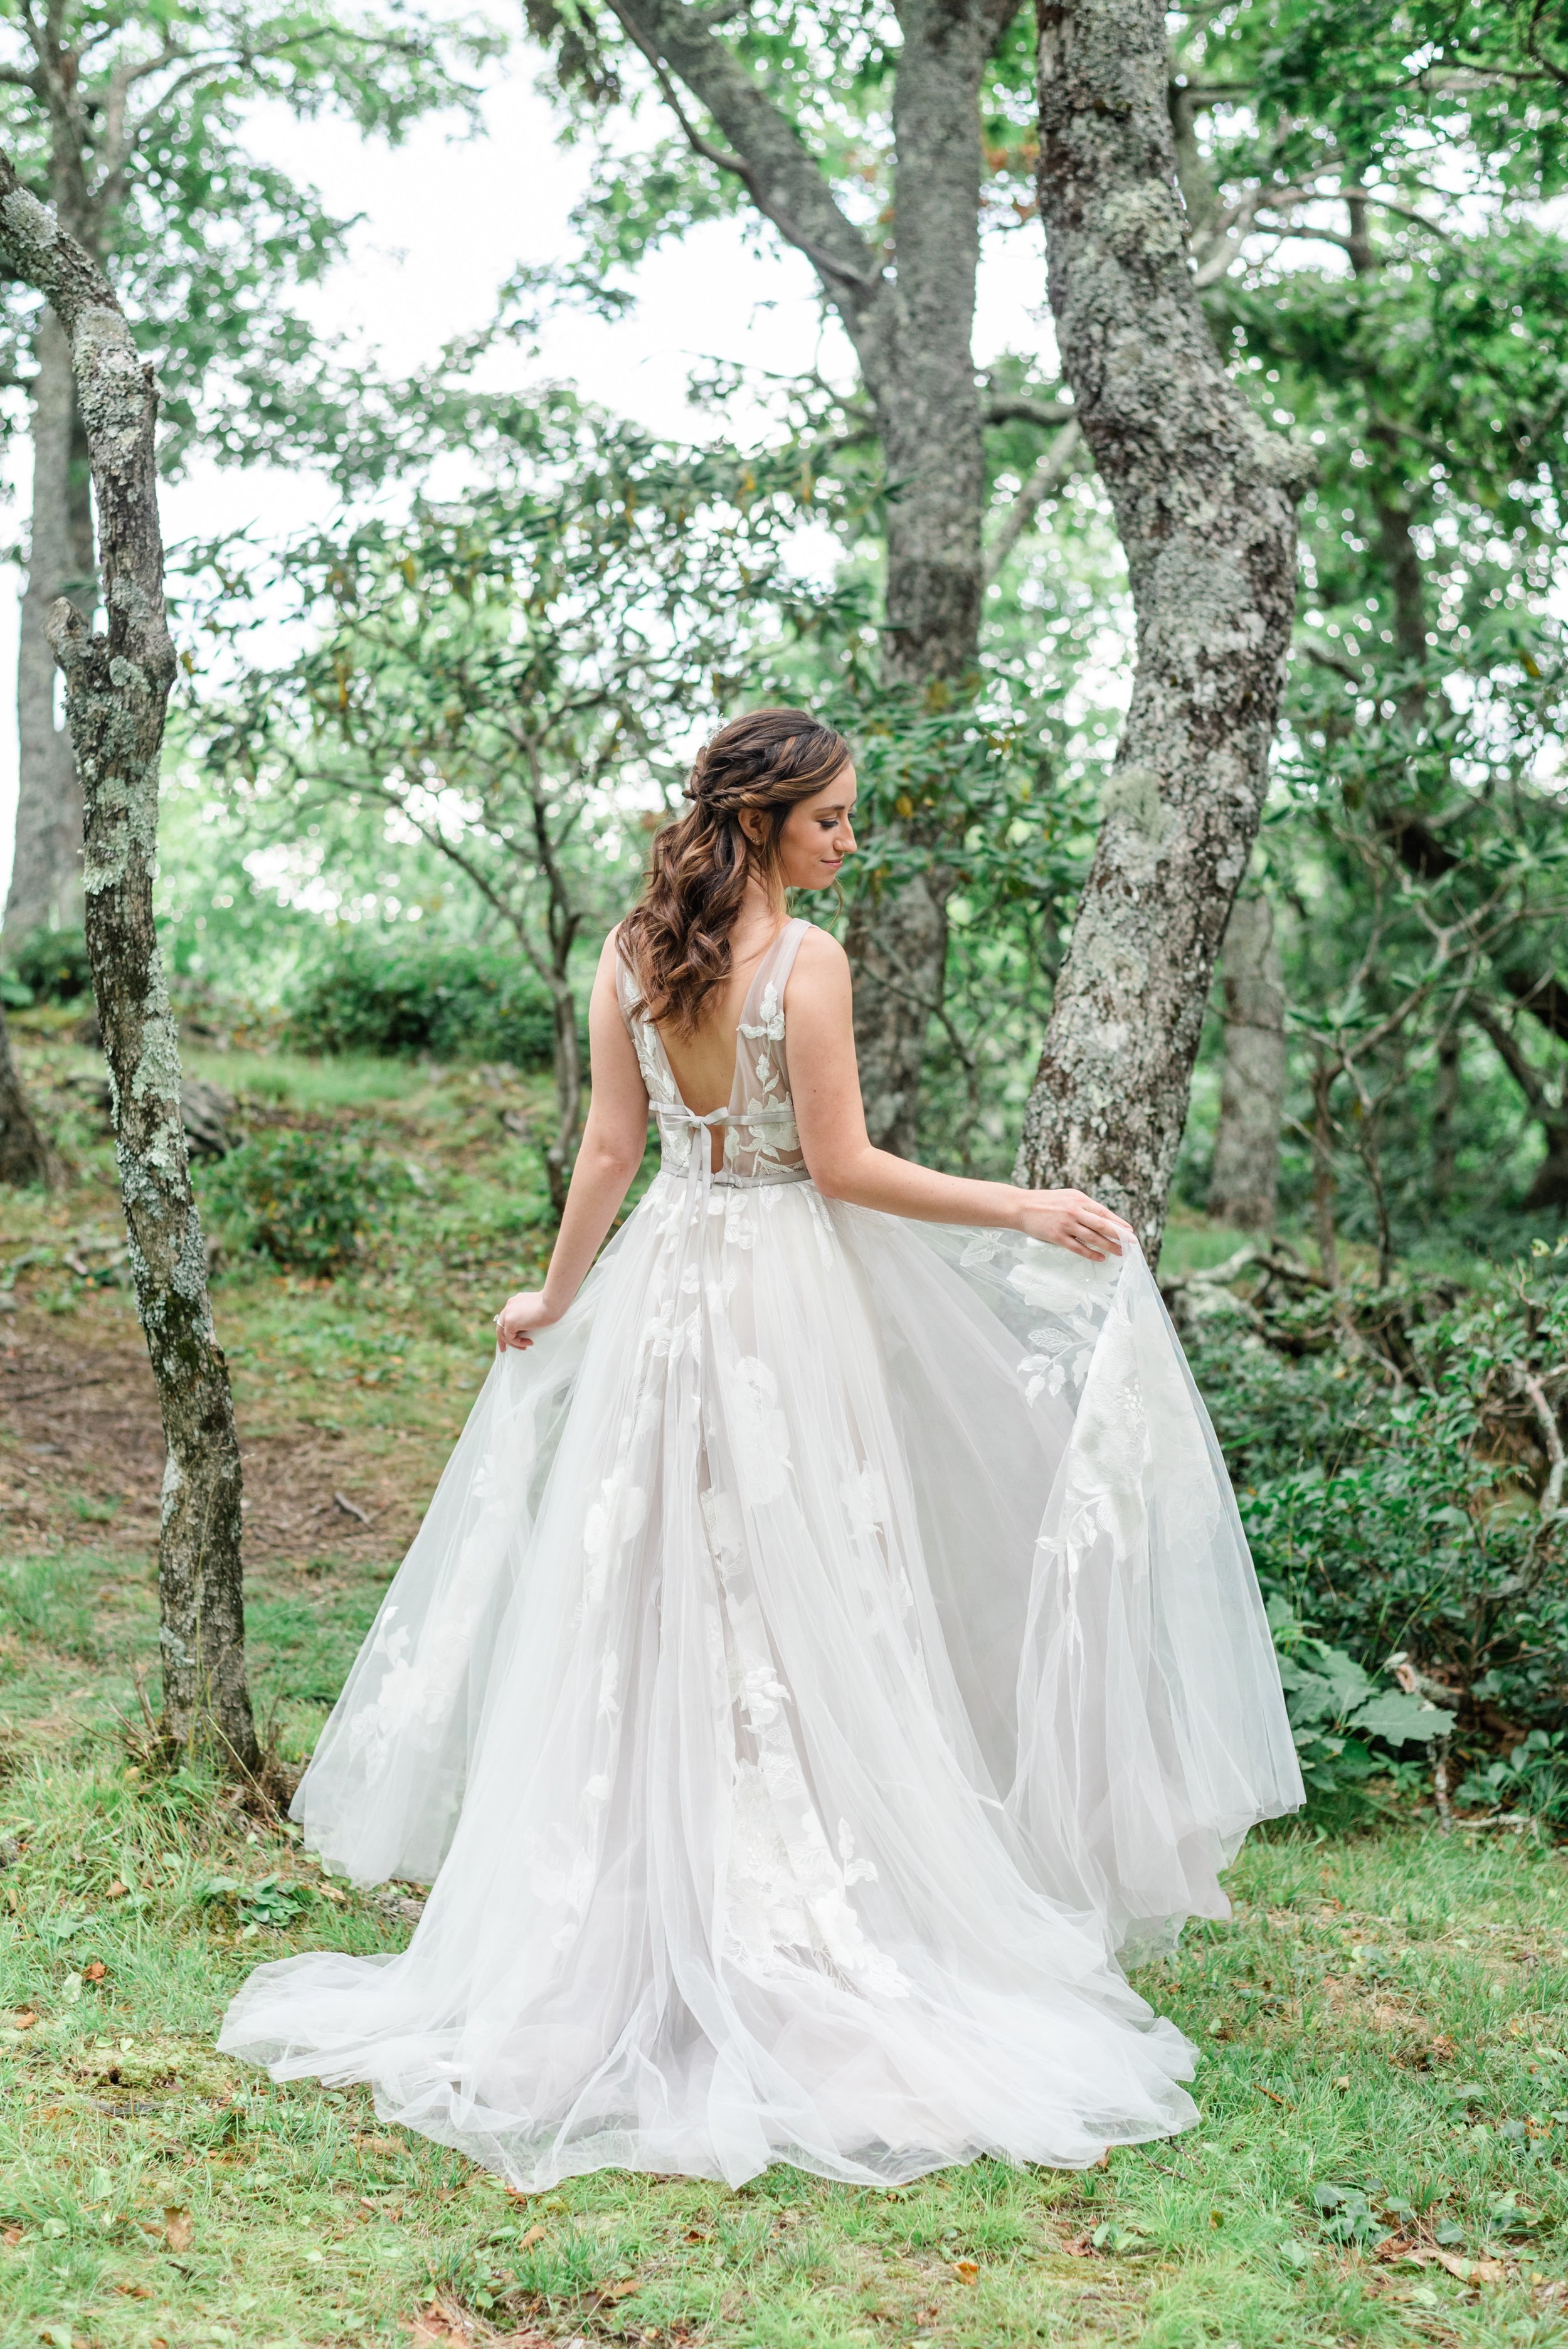 ivory-and-beau-blog-down-for-the-gown-christina-real-bride-galatea-by-willowby-wedding-dress-boho-bride-boho-wedding-dress-mountain-wedding-bridal-gown-wedding-gown-bridal-shop-bridal-boutique-bridal-style-bridal-inspiration-Christina & Patrick-172.jpg